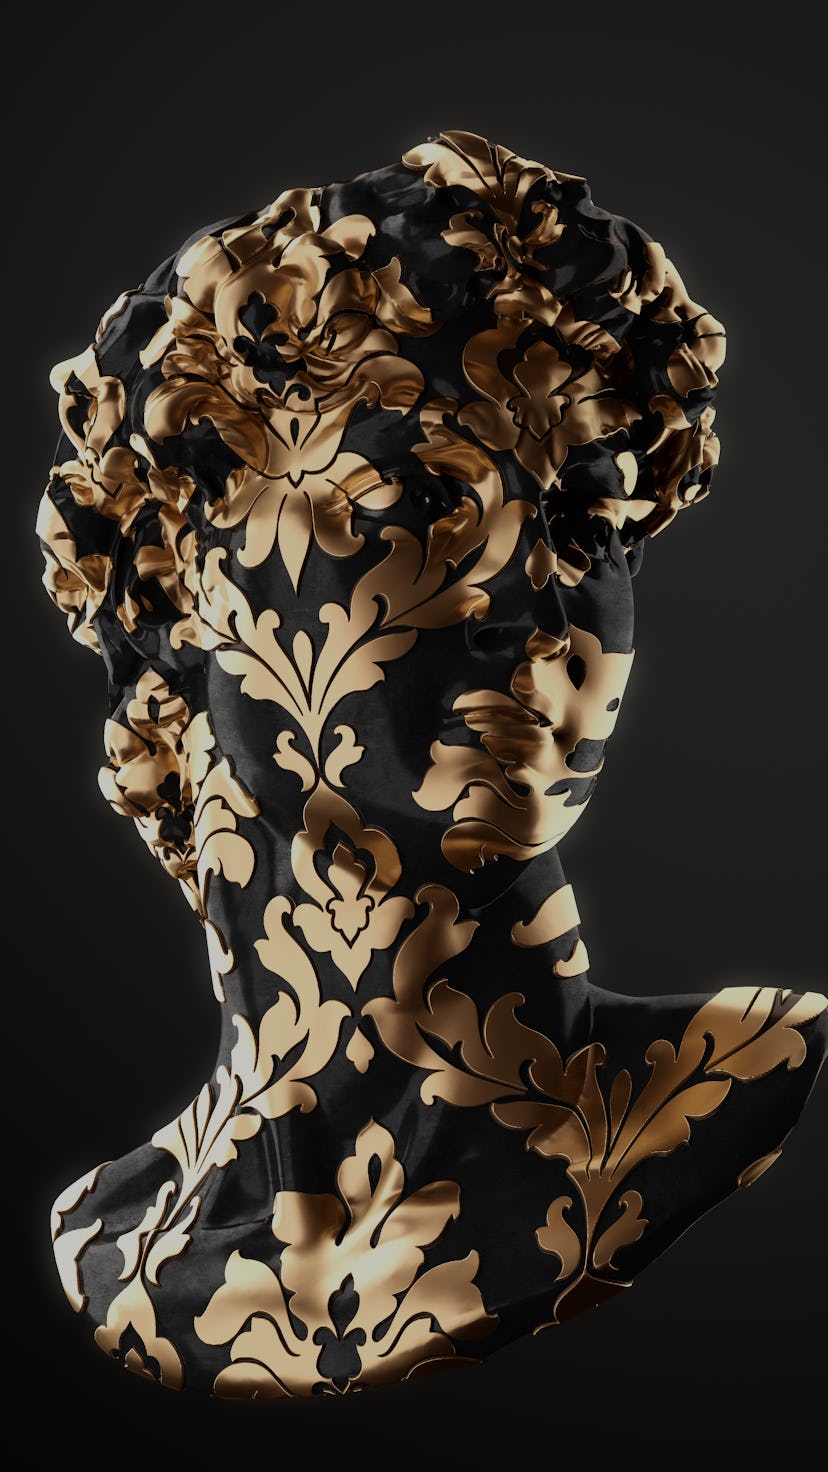 Abstract illustration from 3D rendering of classical head sculpture with golden leaf brocade pattern...